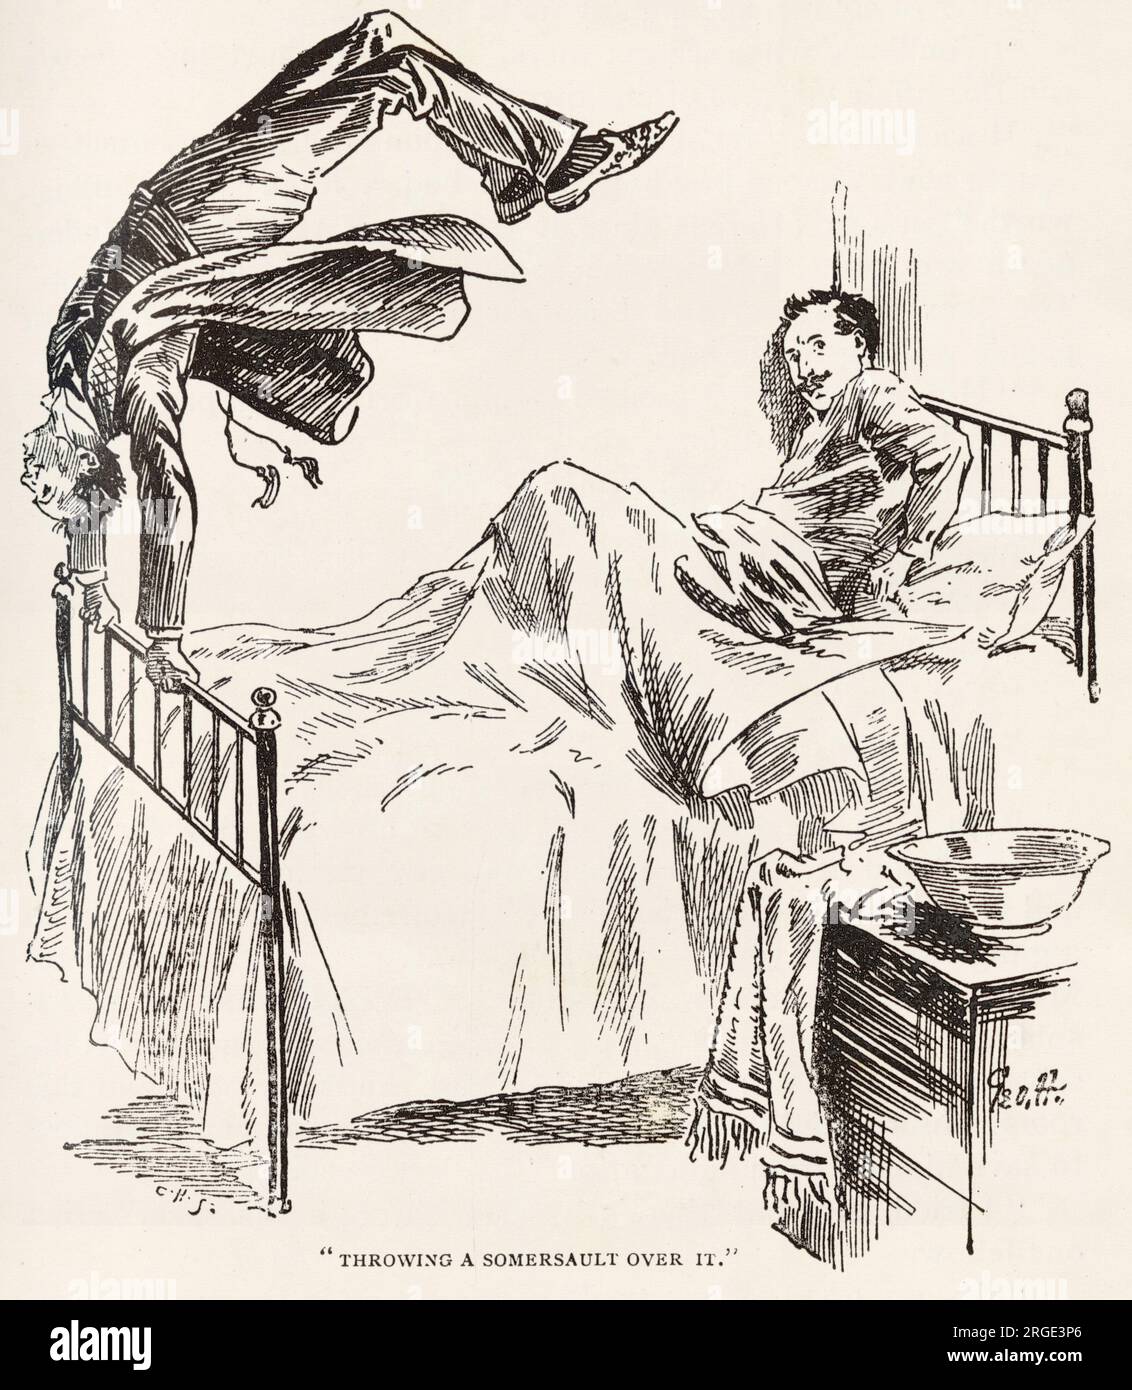 Throwing a somersault over it. Illustration to accompany The Stark Munro Letters by Arthur Conan Doyle in The Idler, 1895. Stock Photo